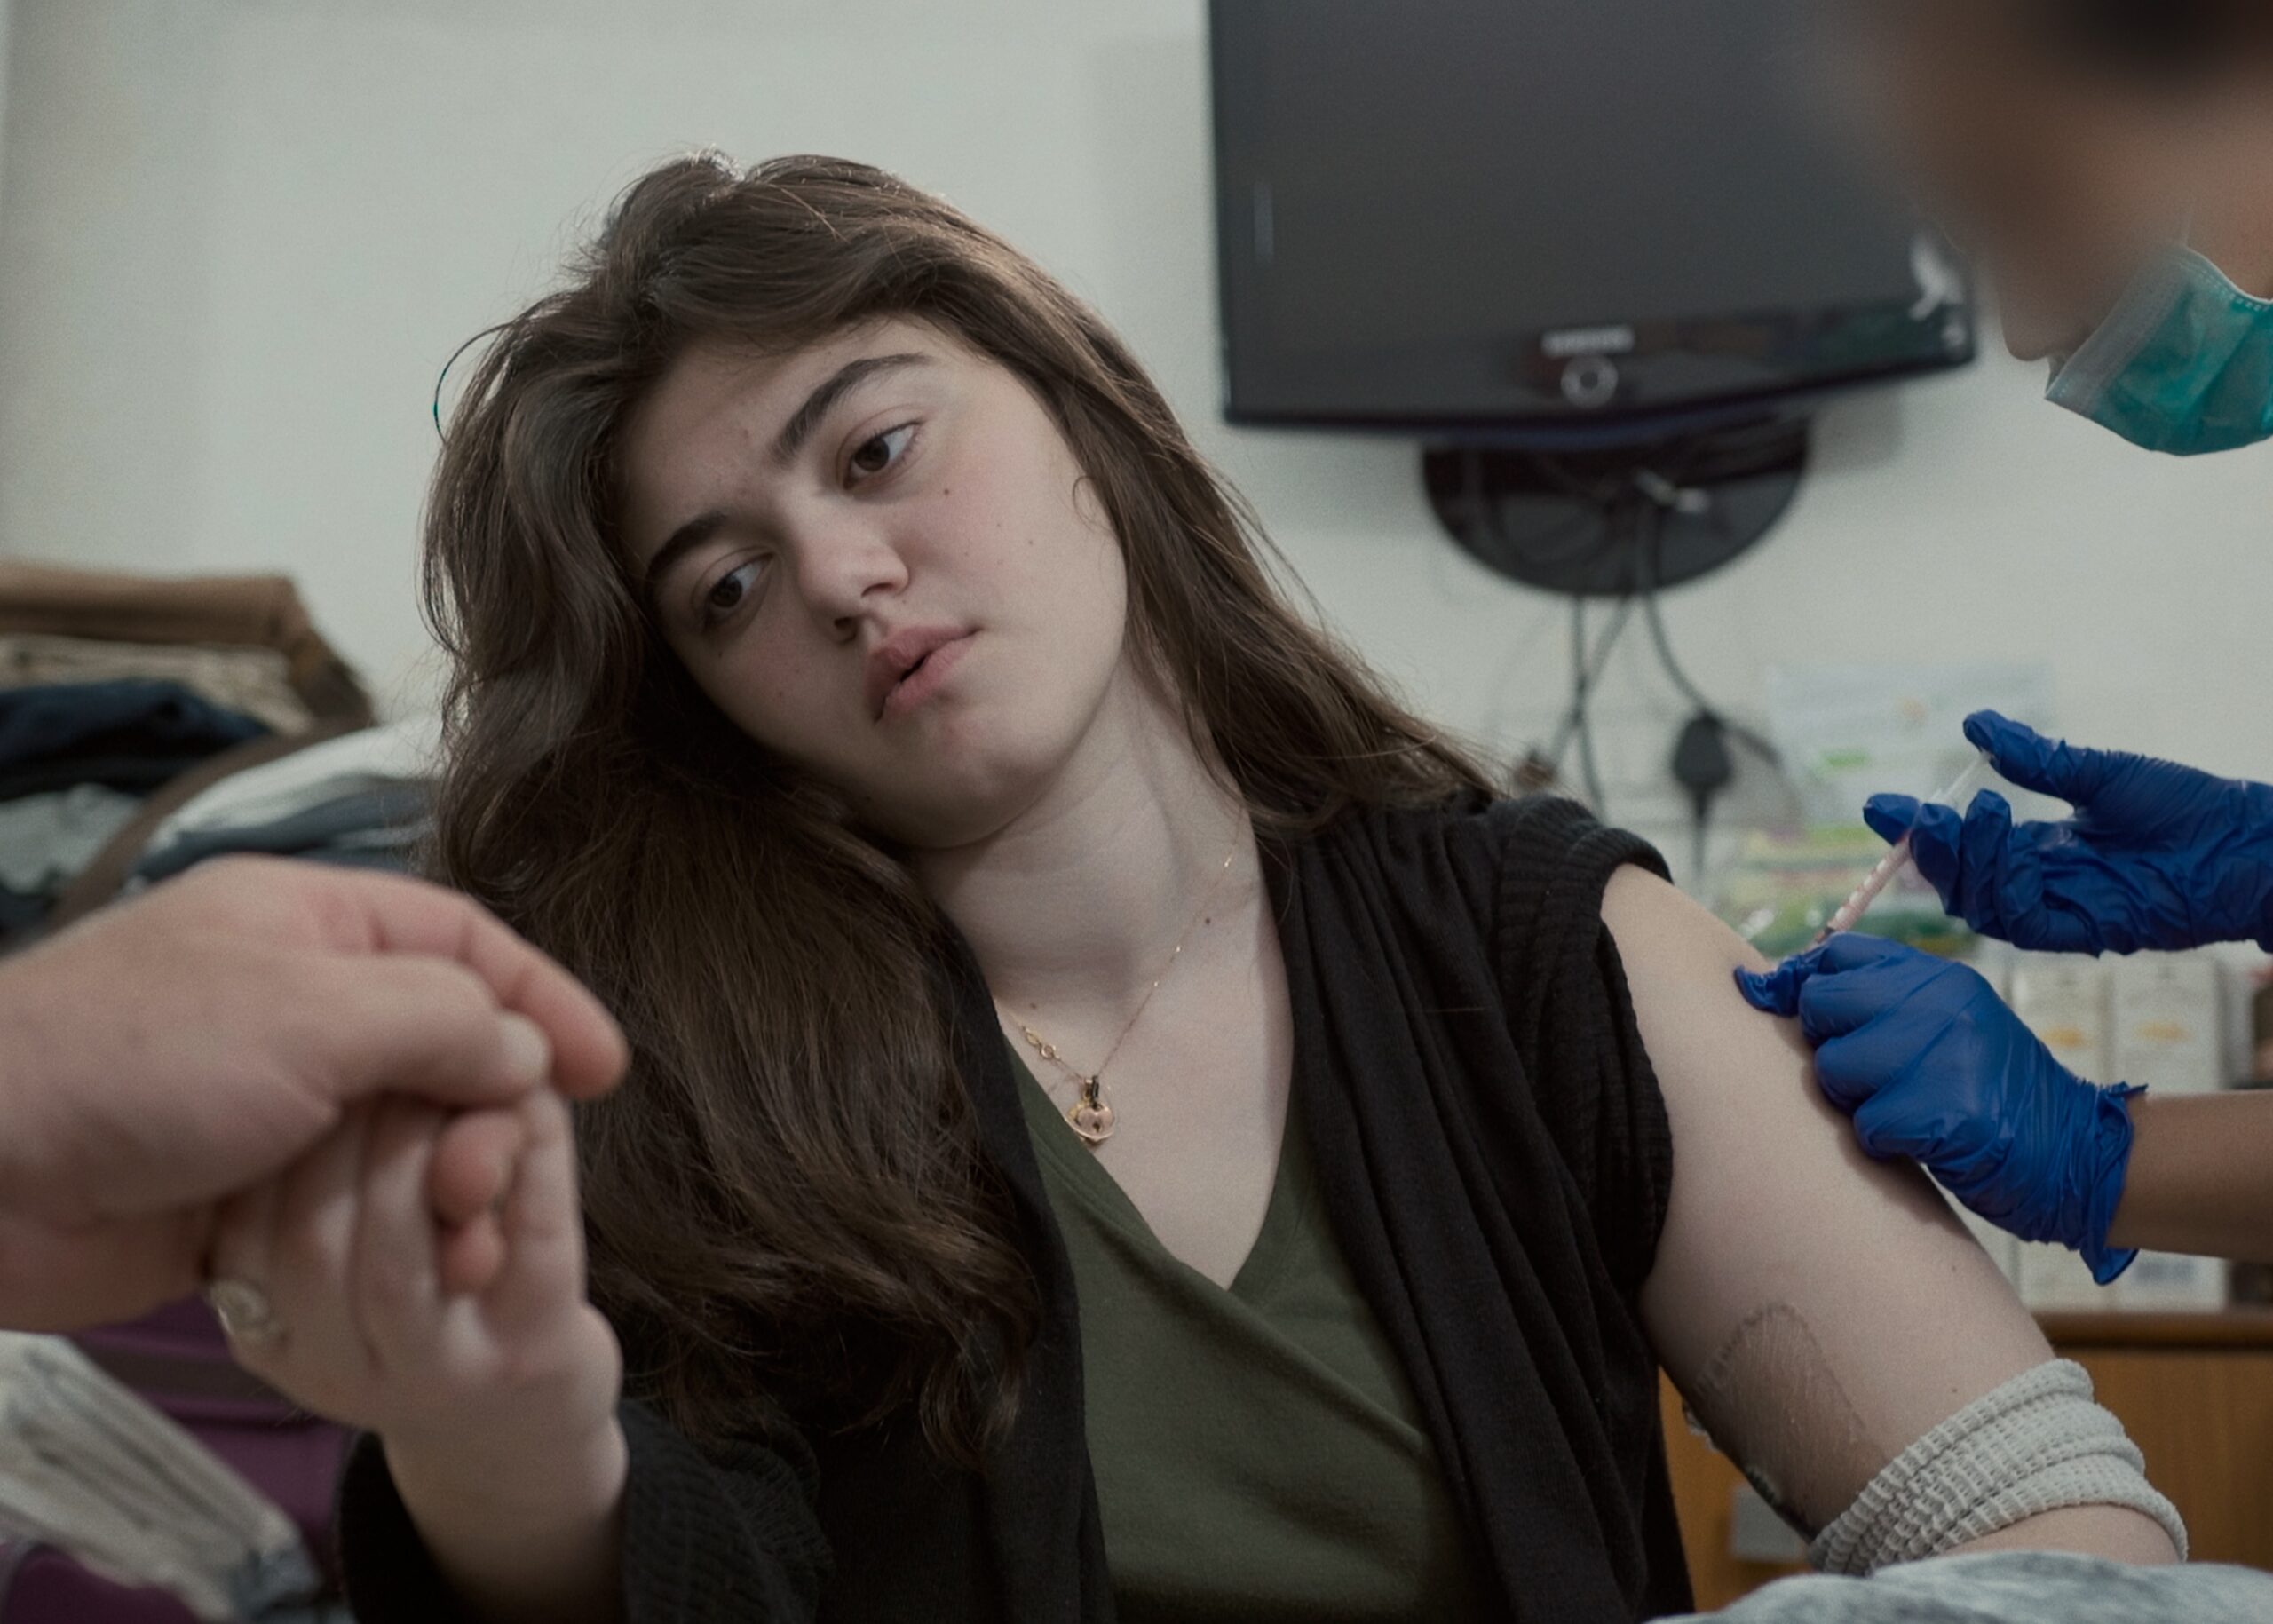 In an effort to heal damage caused by Lyme disease, 15-year-old Julia Bruzzese receives an injection of experimental stem cells at a clinic in New Delhi, India. COURTESY THE QUIET EPIDEMIC